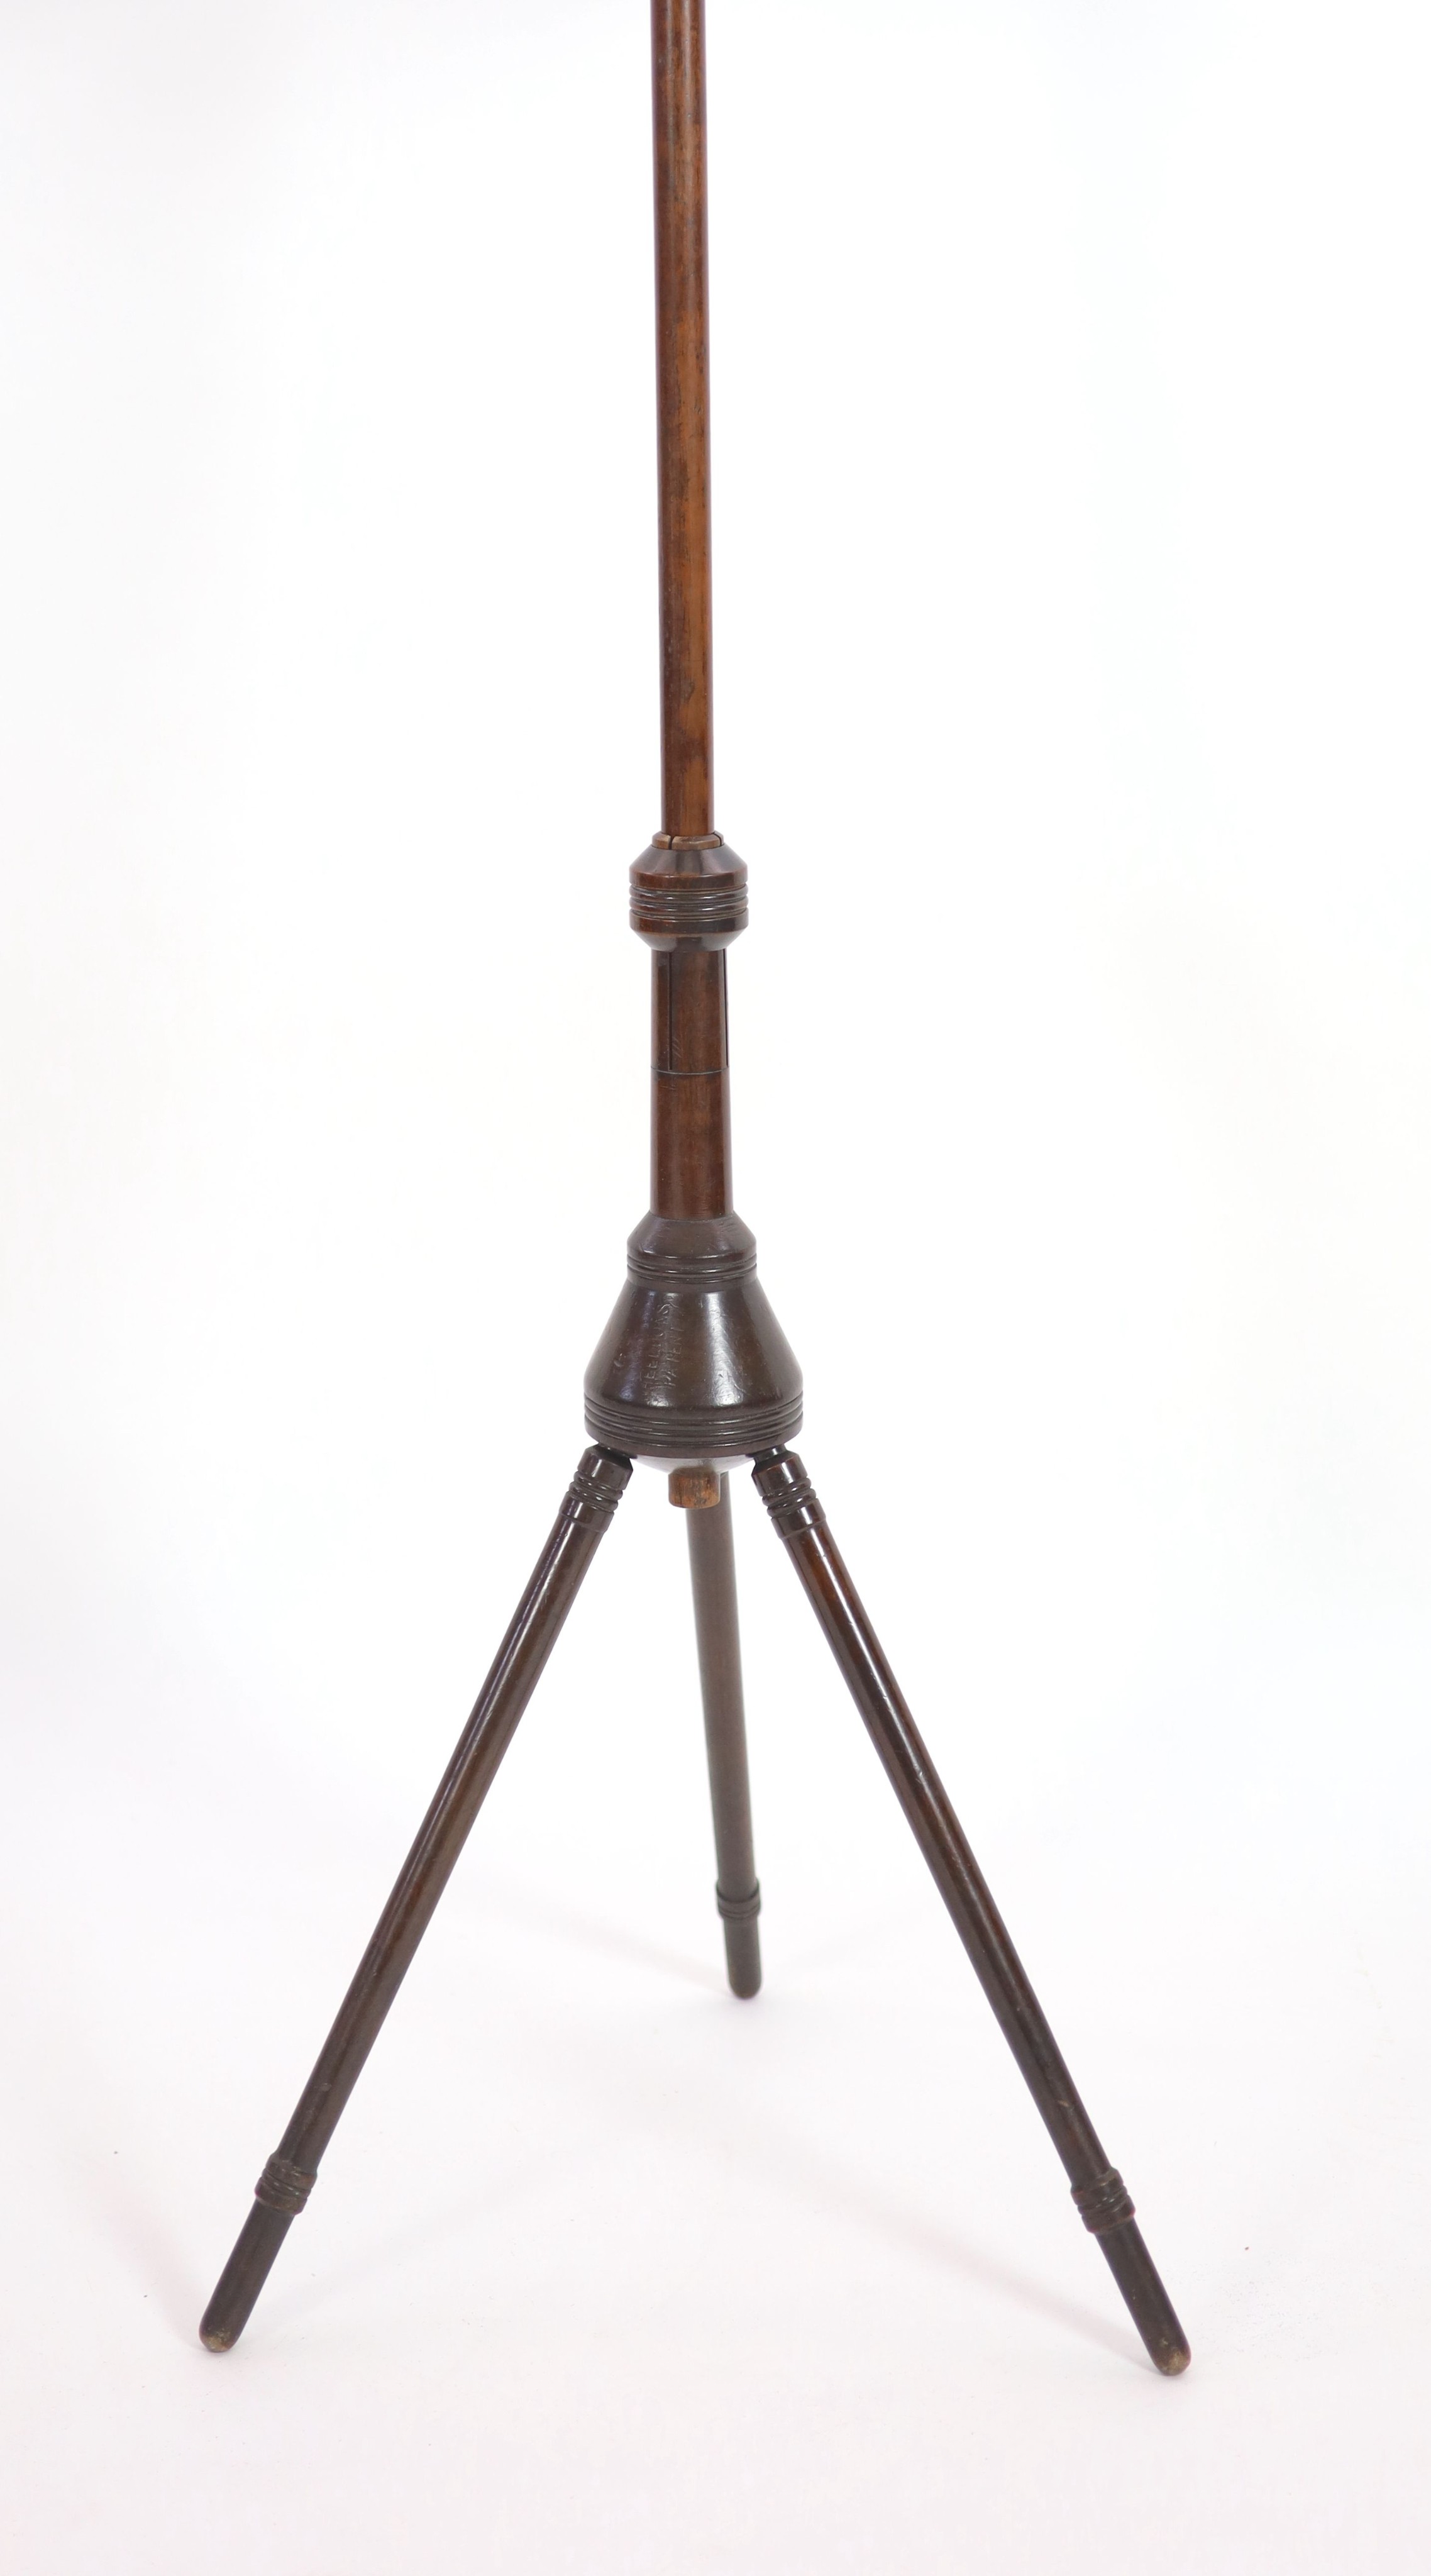 A Wheeldon's Patent turned mahogany duet stand of aesthetic design, W.41cm H.146cm